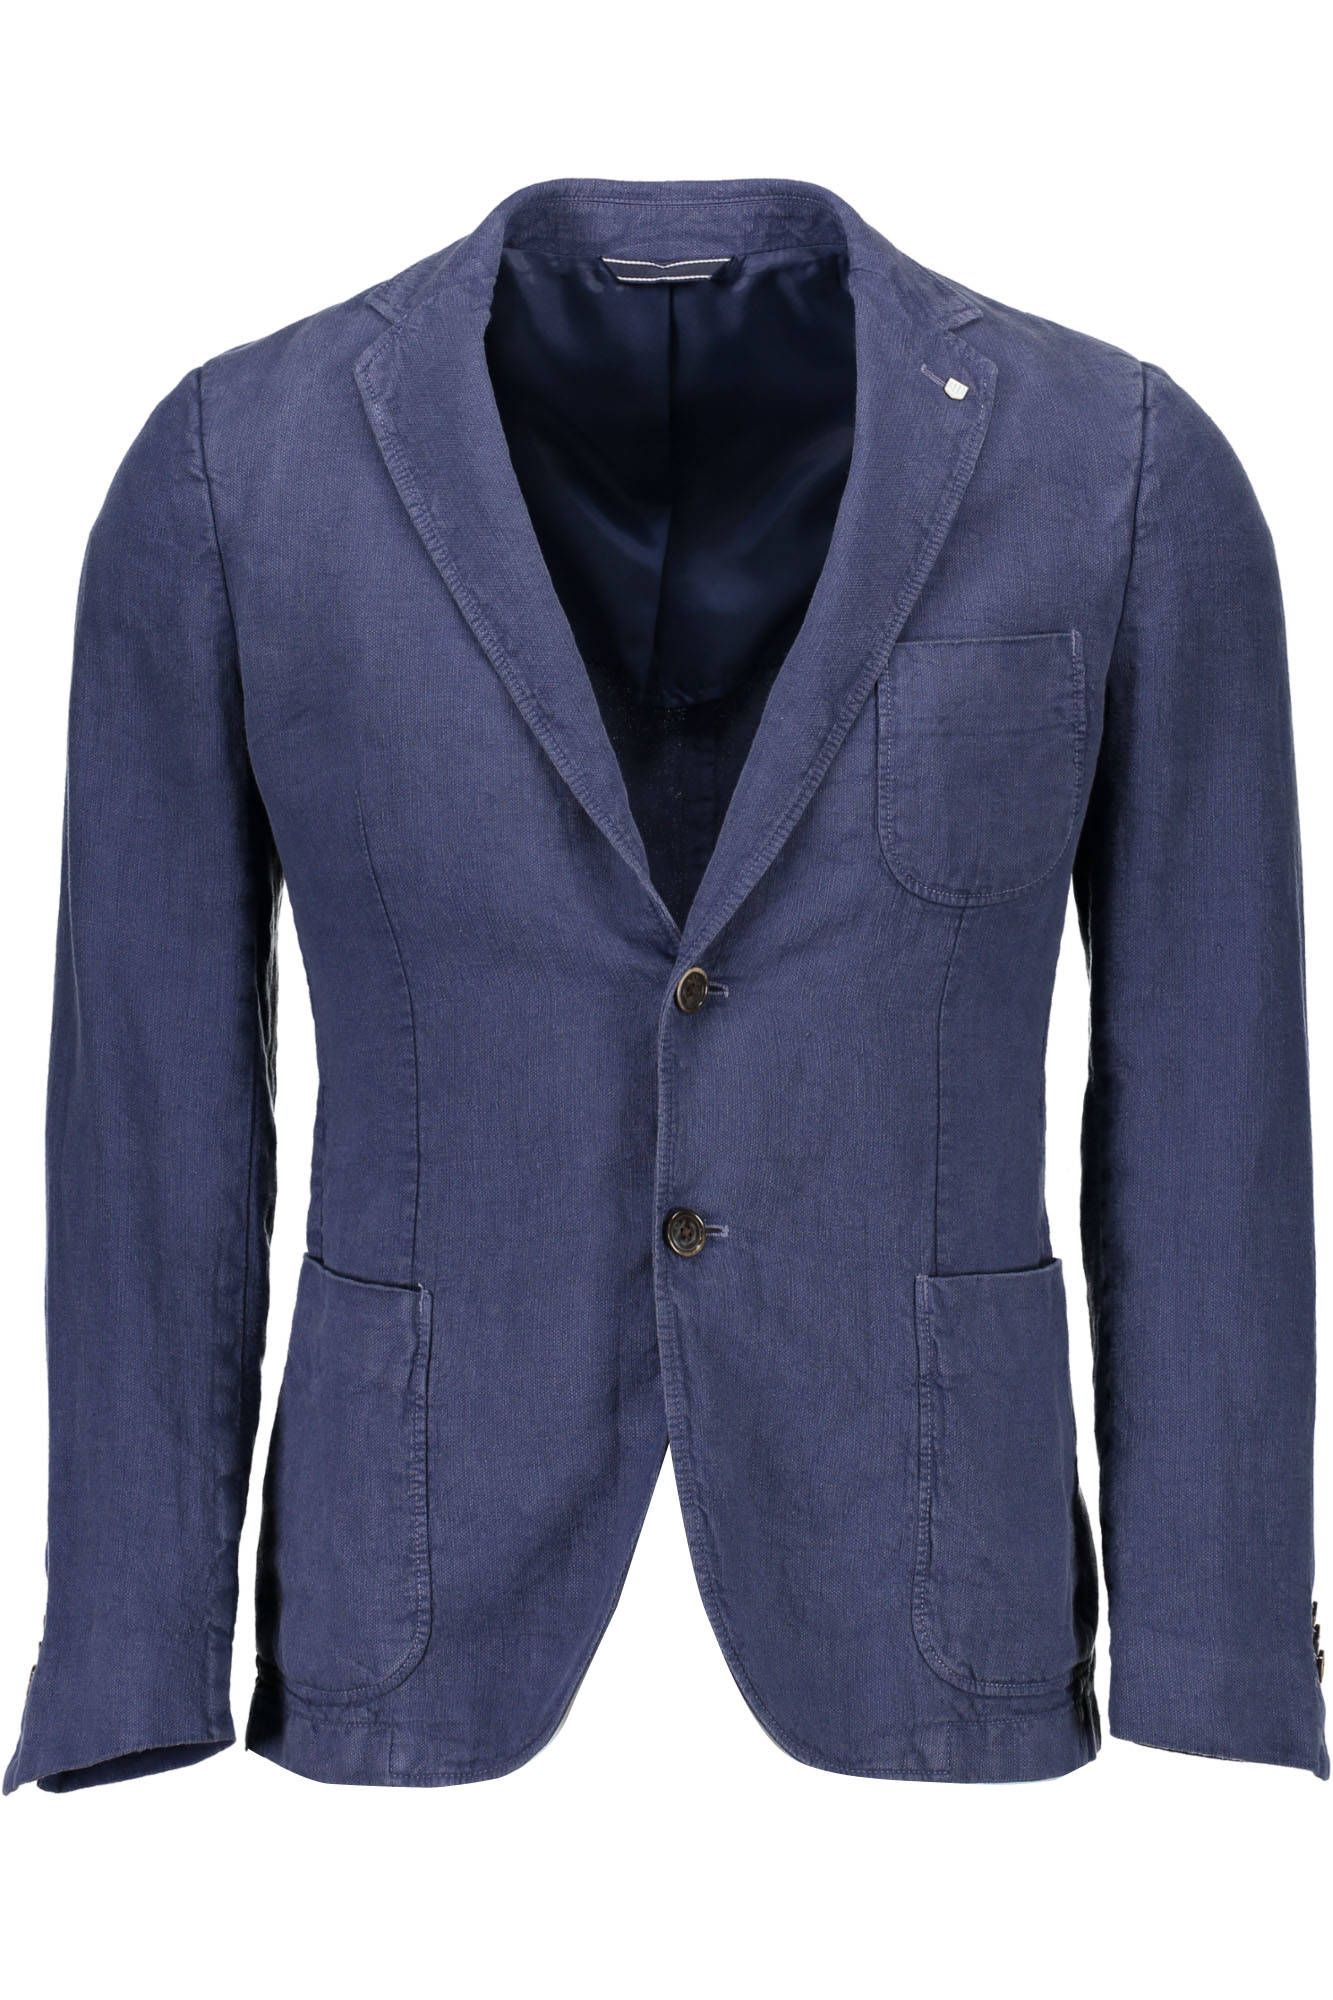 Classic  Linen Jacket with Buttons and Multiple Pockets